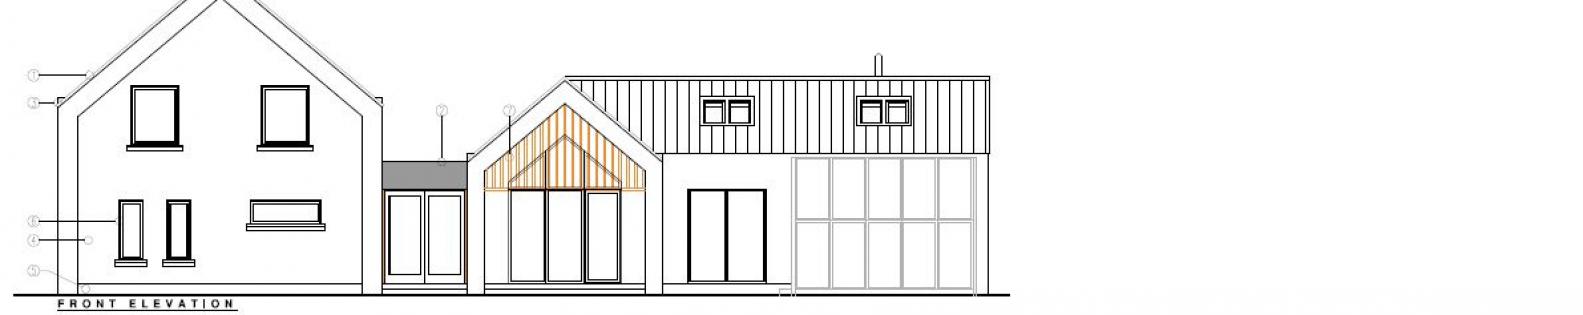 New dwelling and garage designs